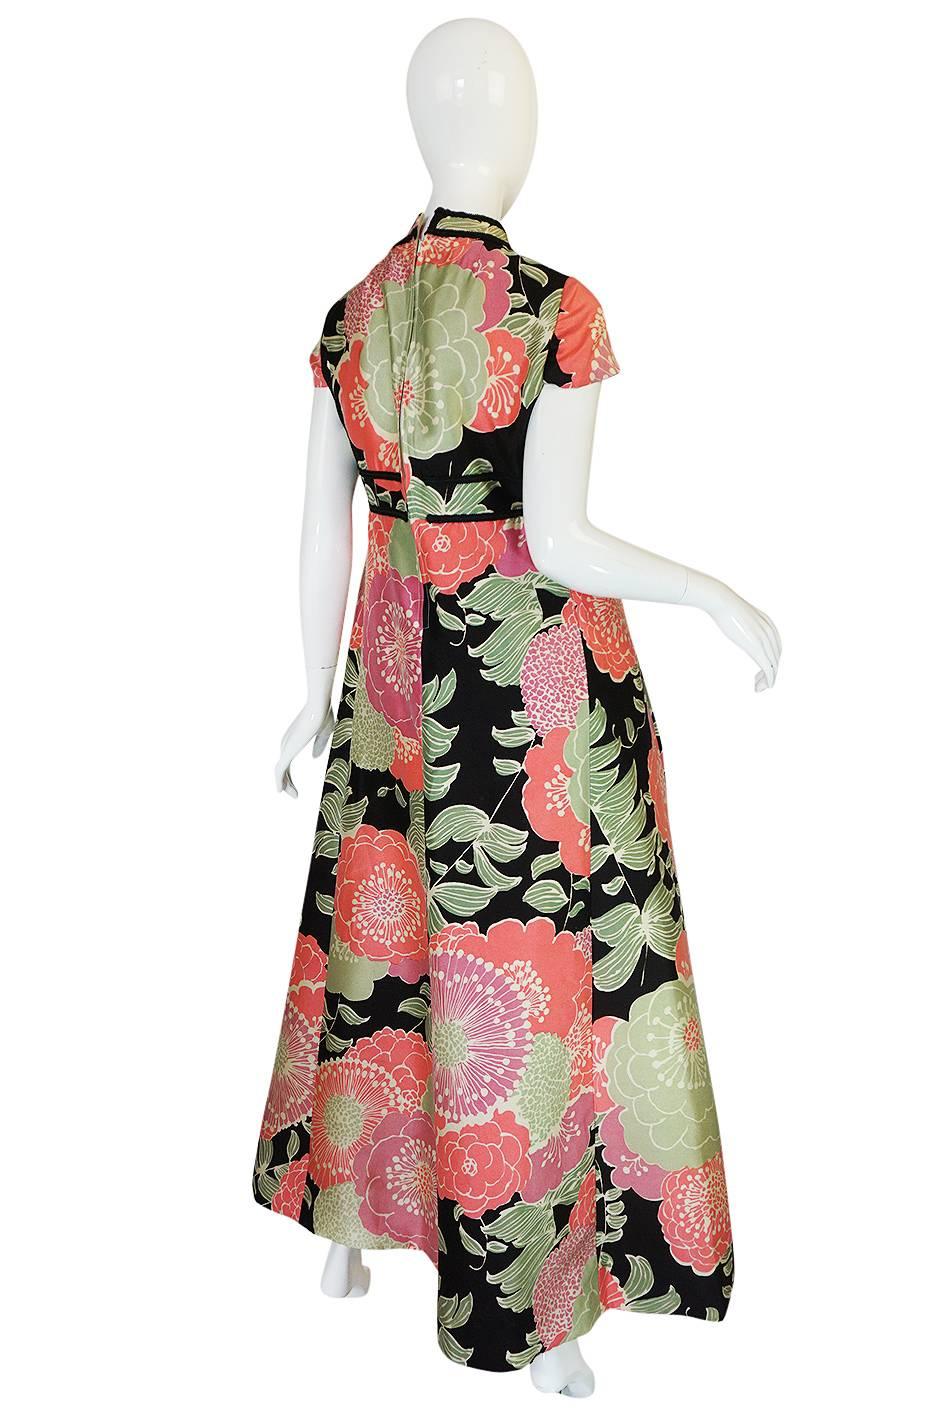 This beautiful and spring-time feeling dress is one of my favorites from the pieces of Malcolm Starr that I have had in the shop. The silk fabric is very pretty and fresh feeling with huge flowers splayed across its surface. The bodice skims over